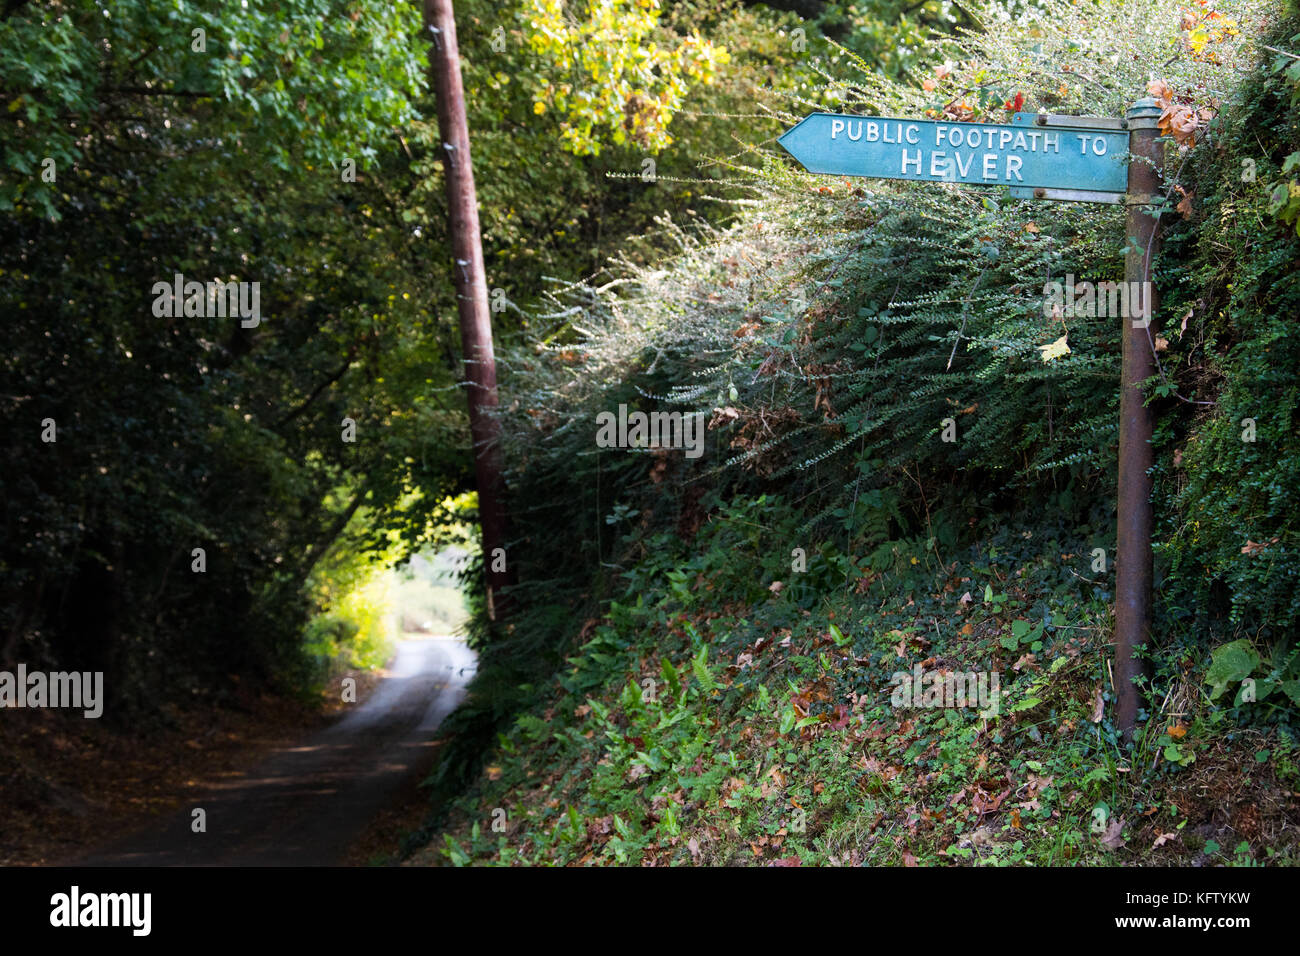 Public footpath to Hever Castle, Hever, England Stock Photo